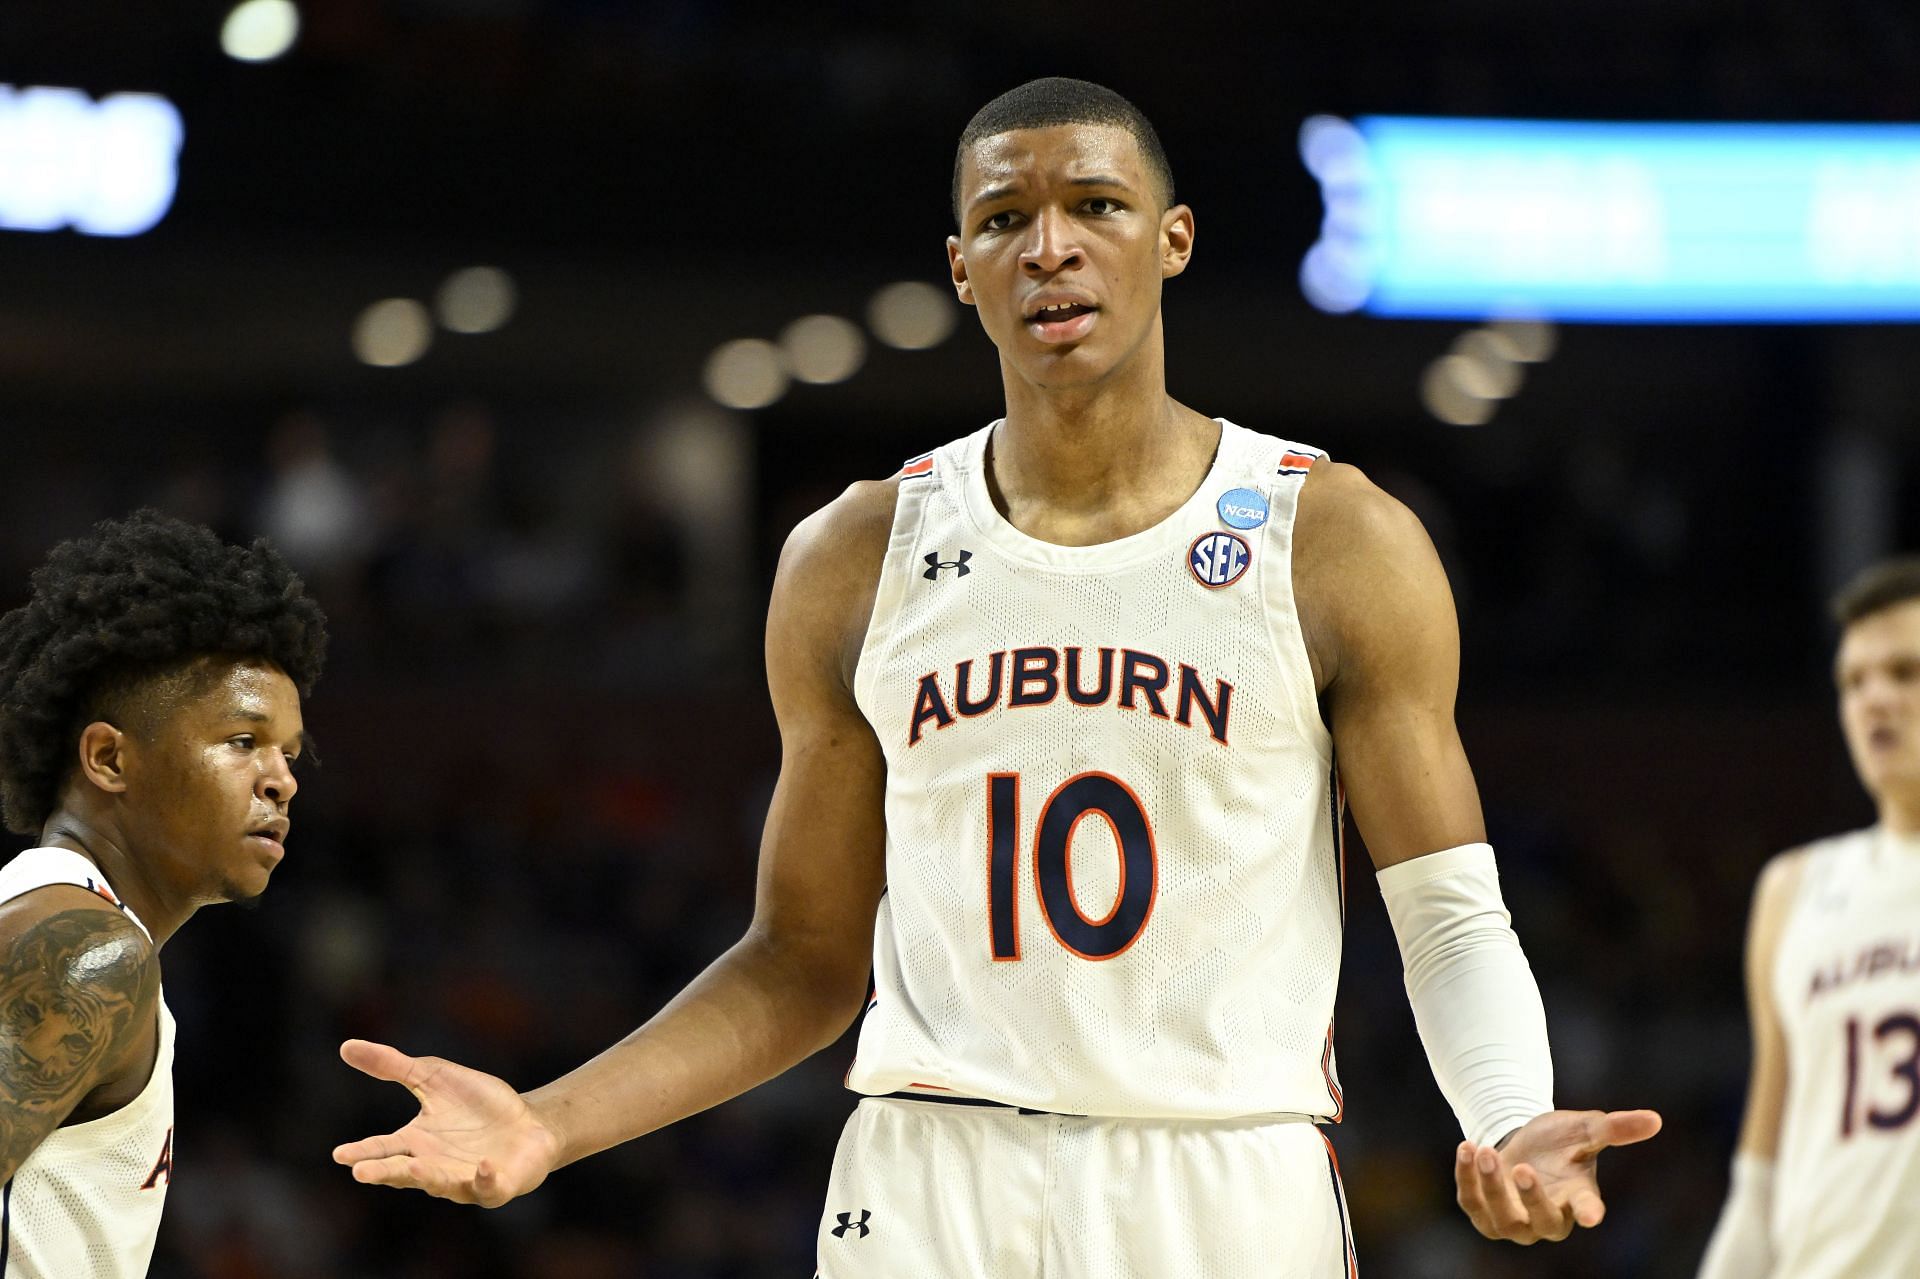 Auburn forward Jabari Smith is expected to be a top pick in the NBA draft.